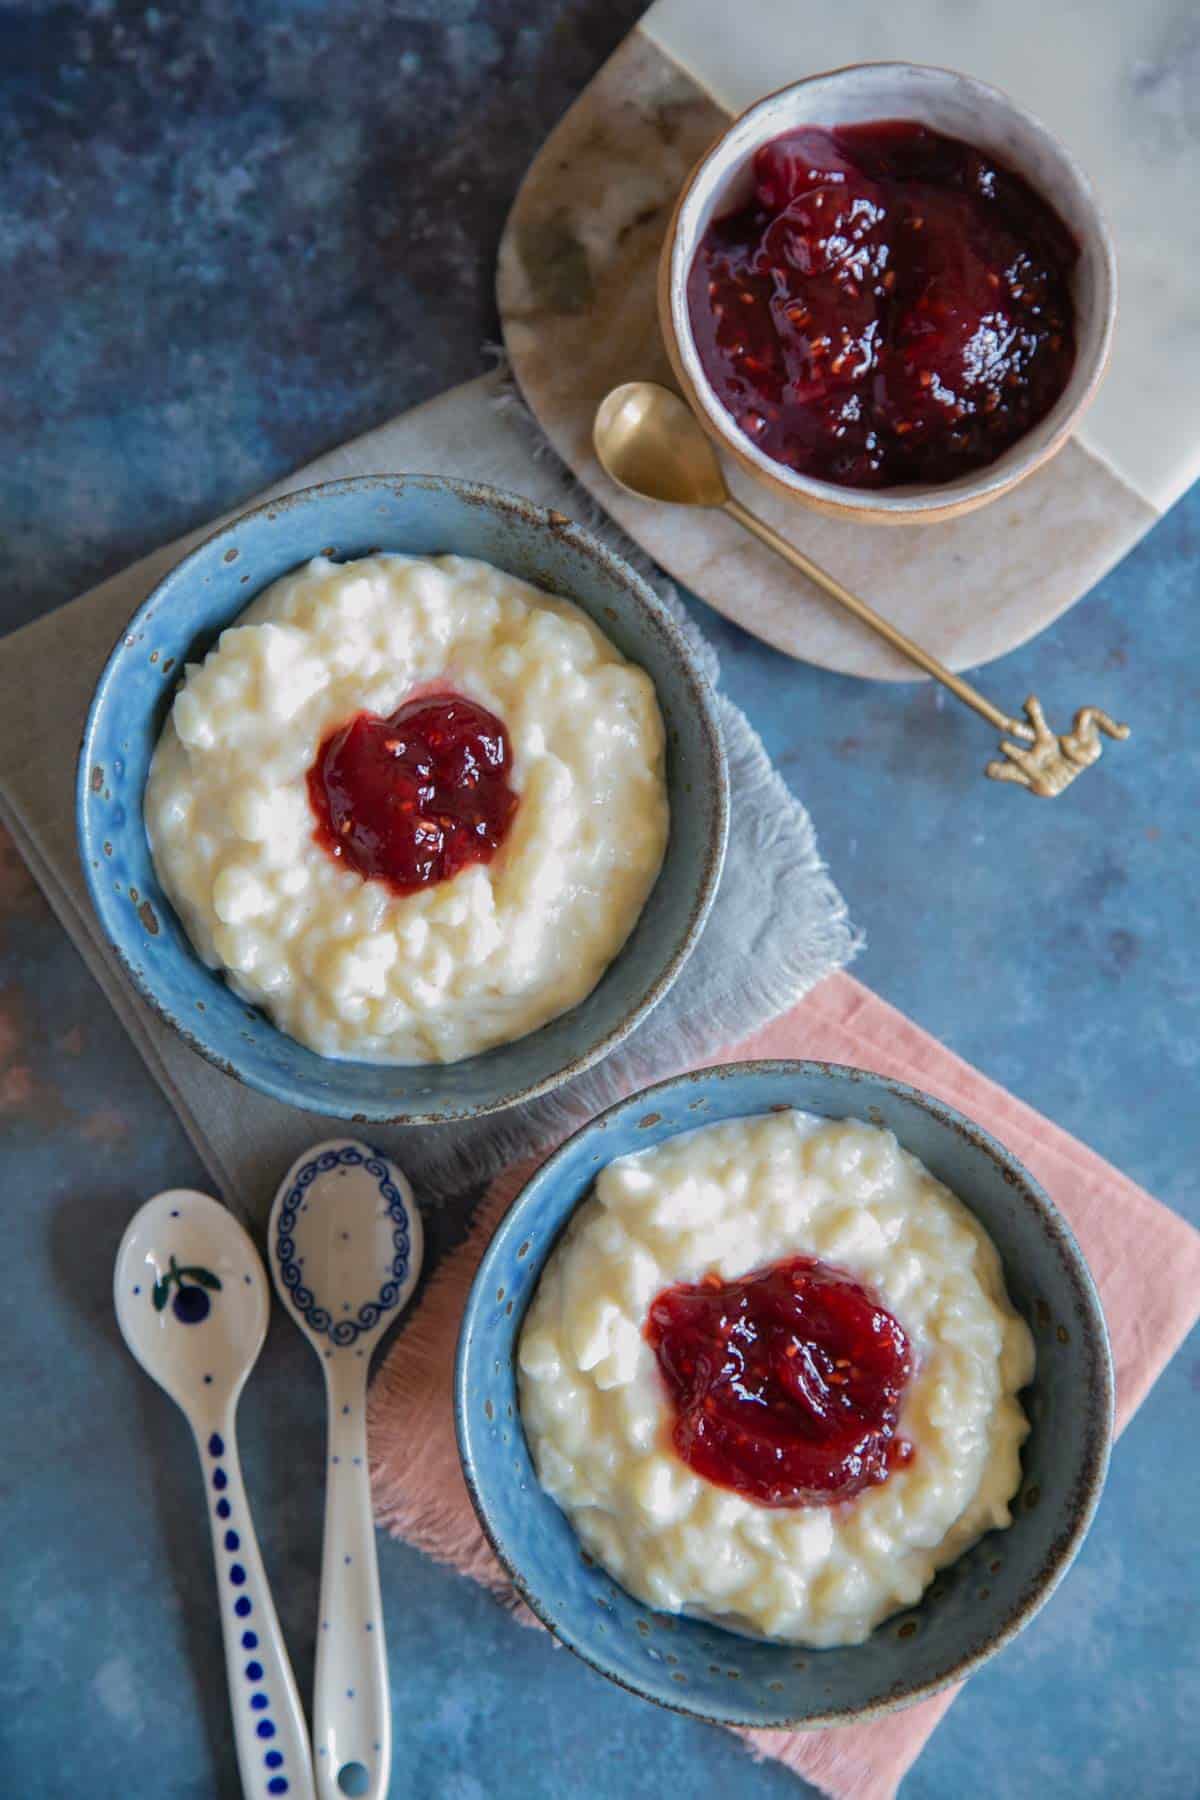 A view from above of a table spread with bowls of creamy rice pudding and homemade jam.